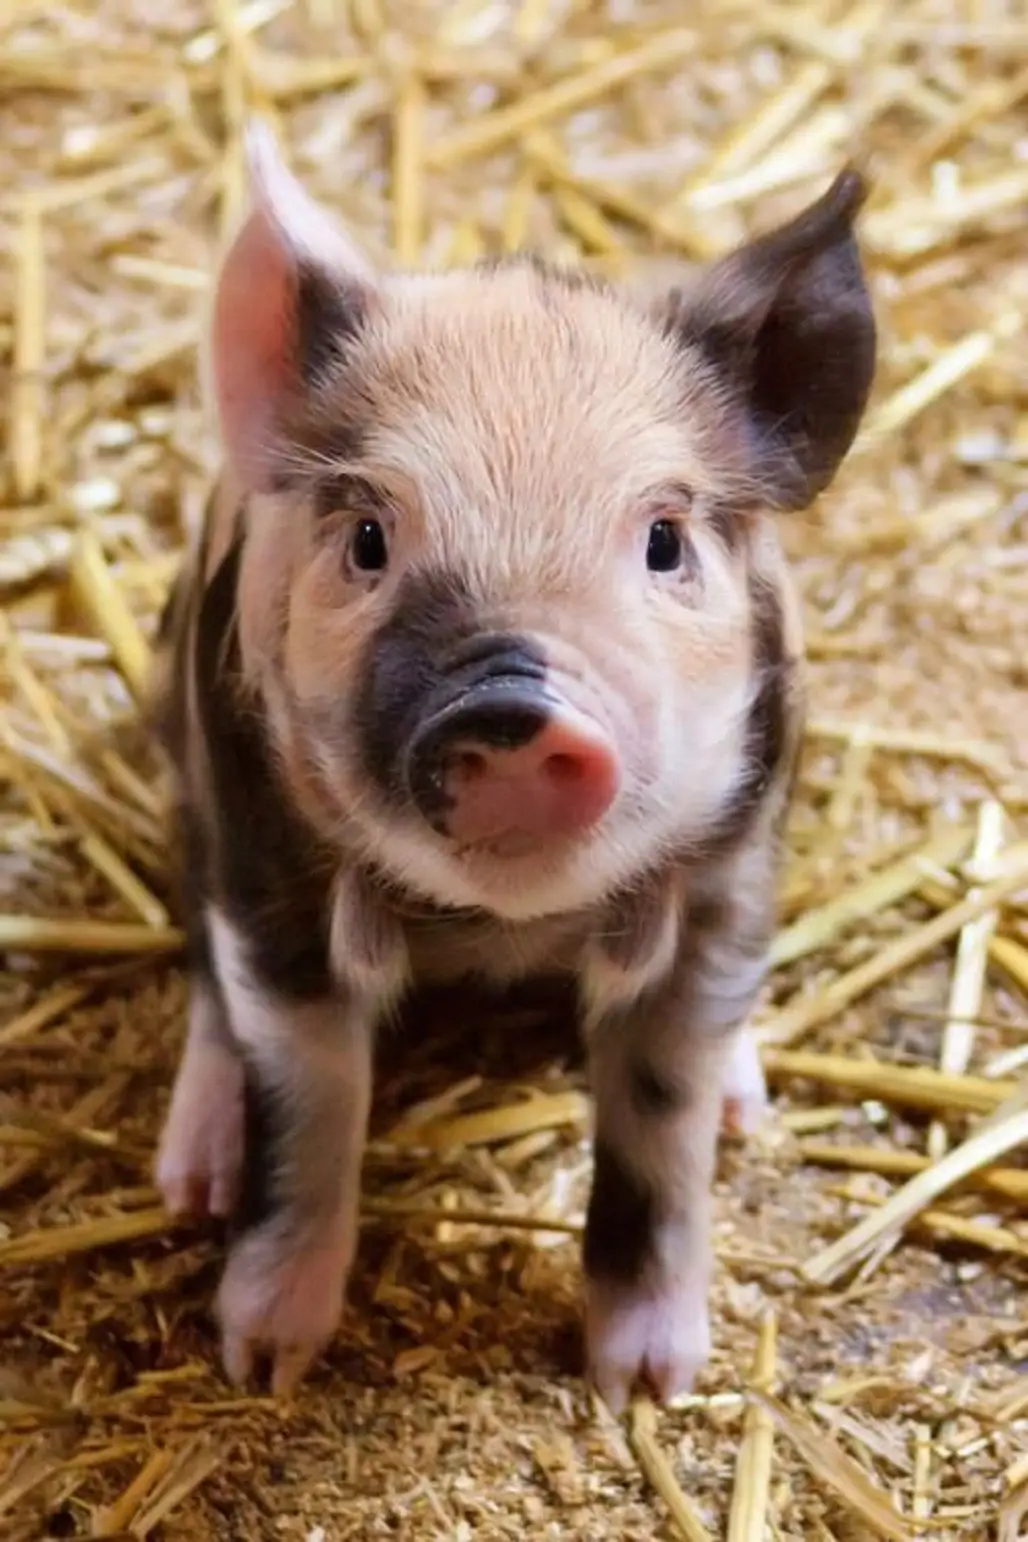 Pigs and Their Surprising Intelligence